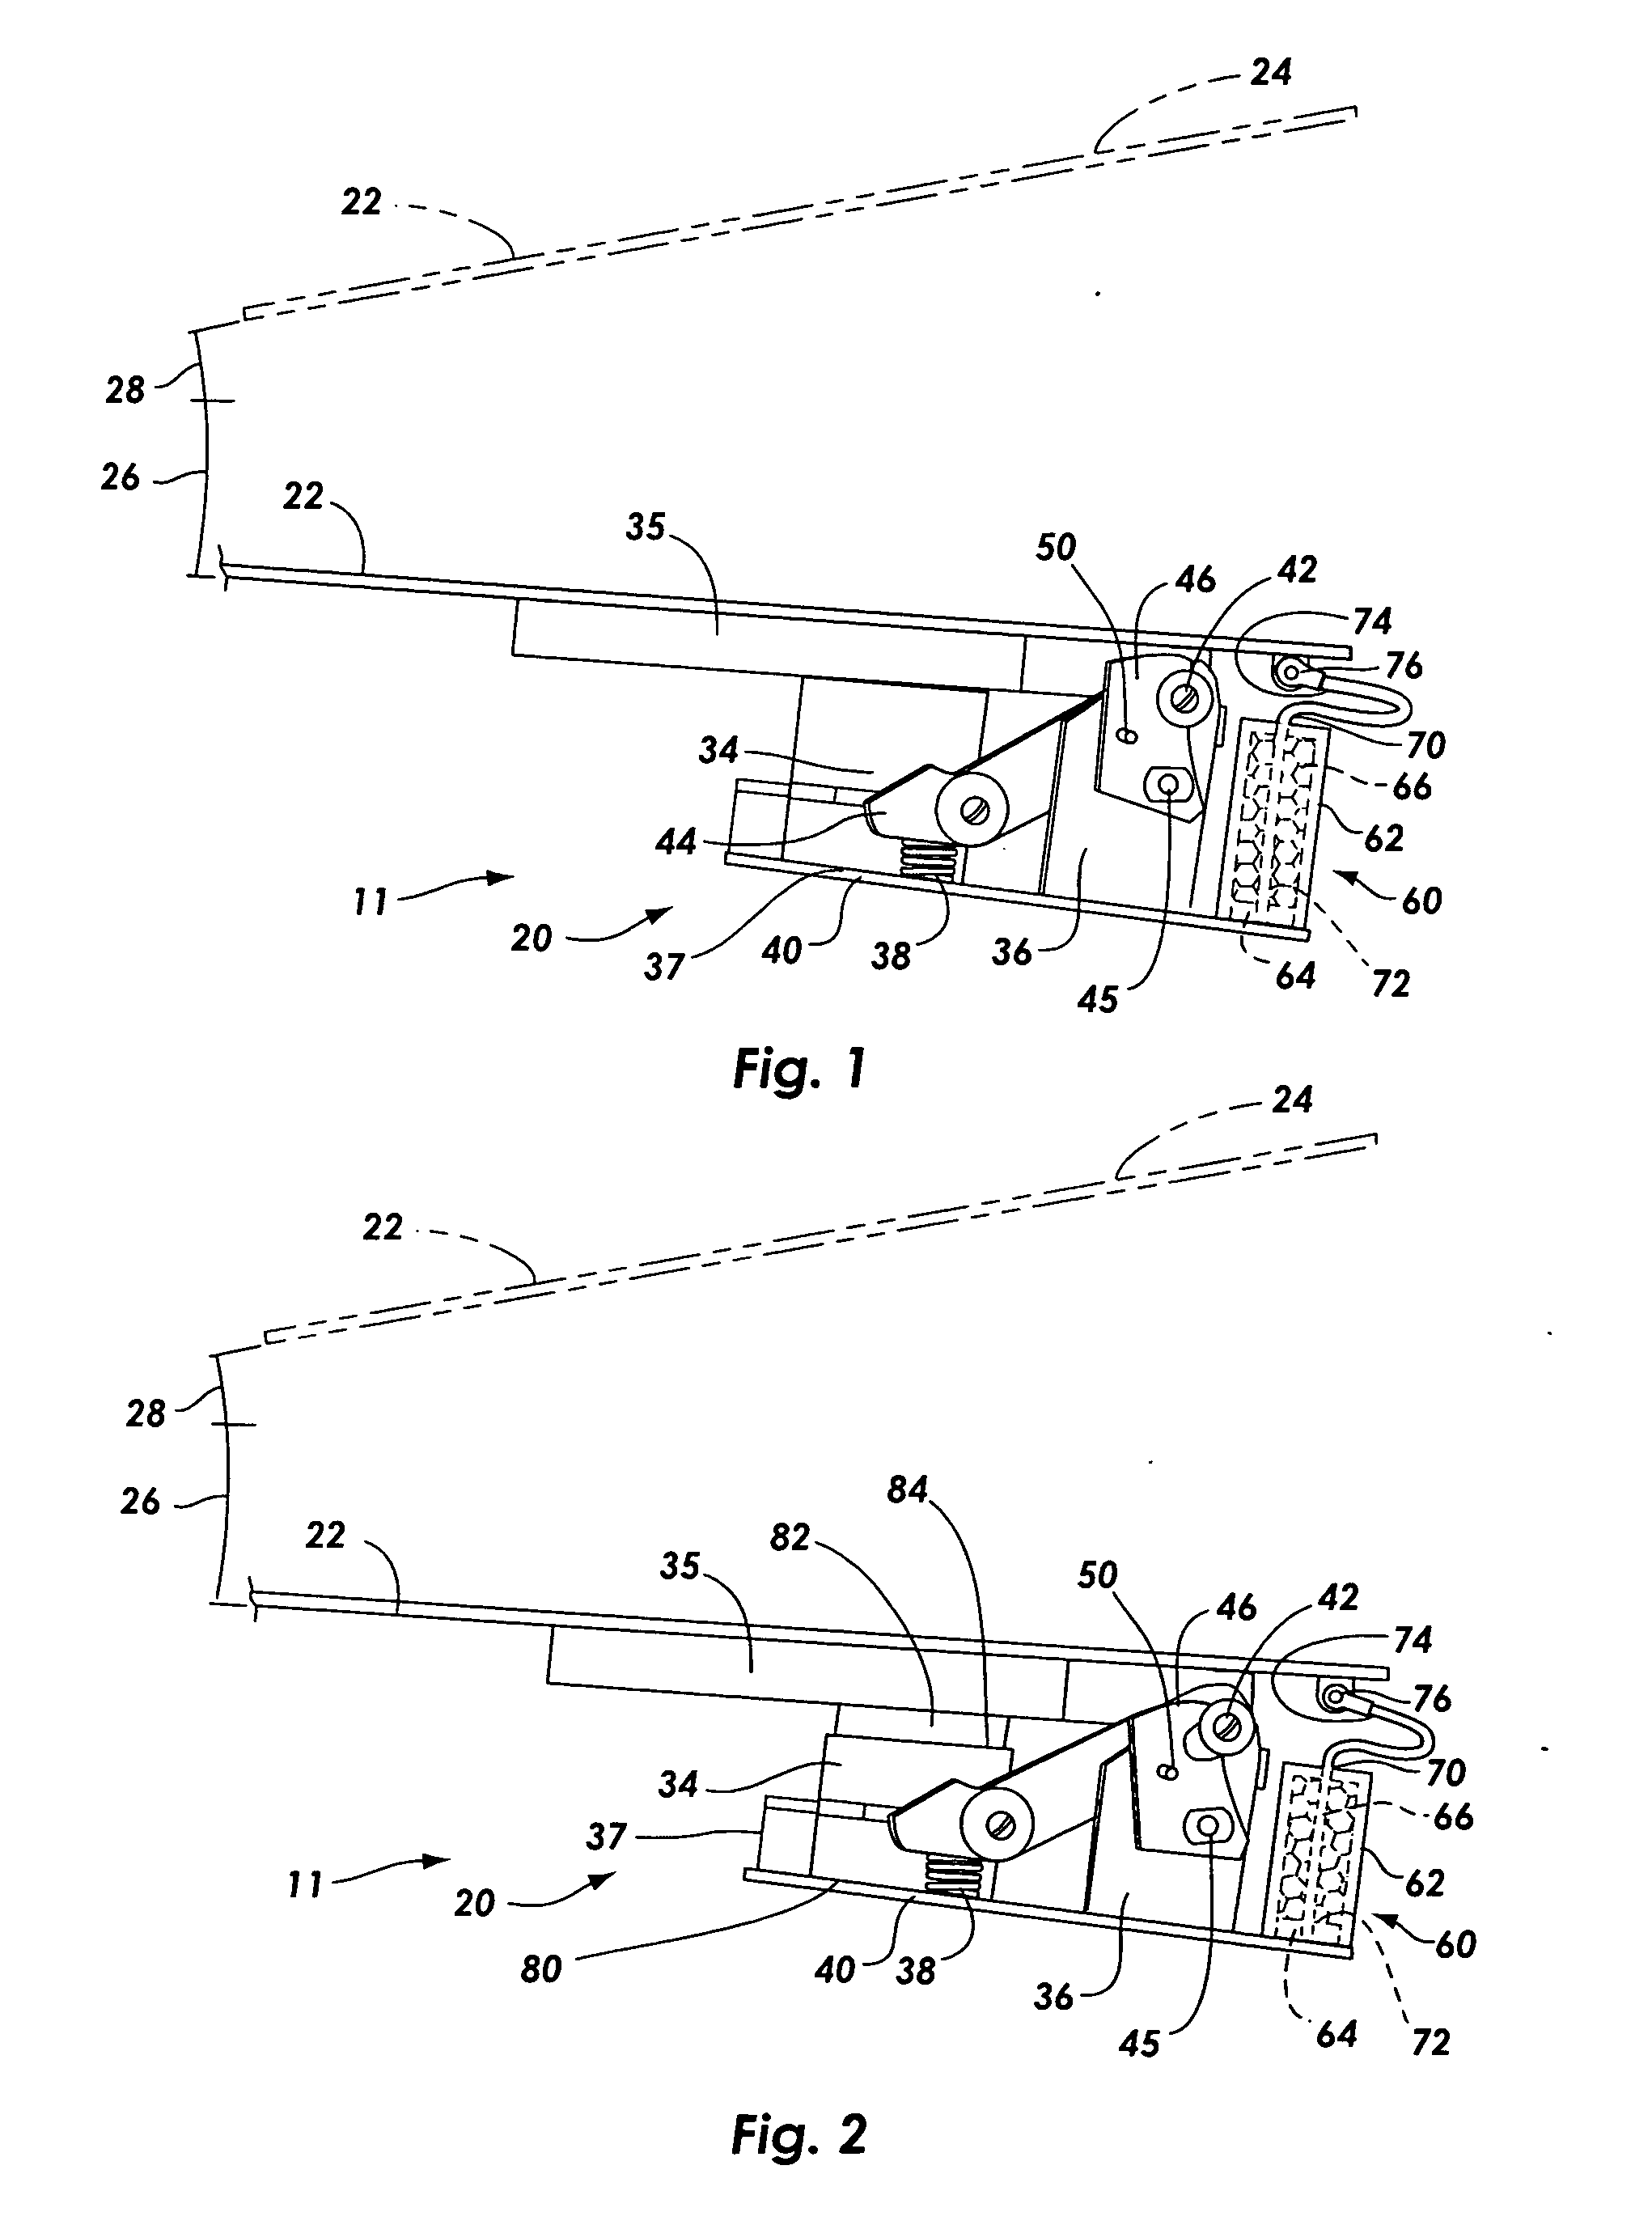 Active vehicle hood system and method